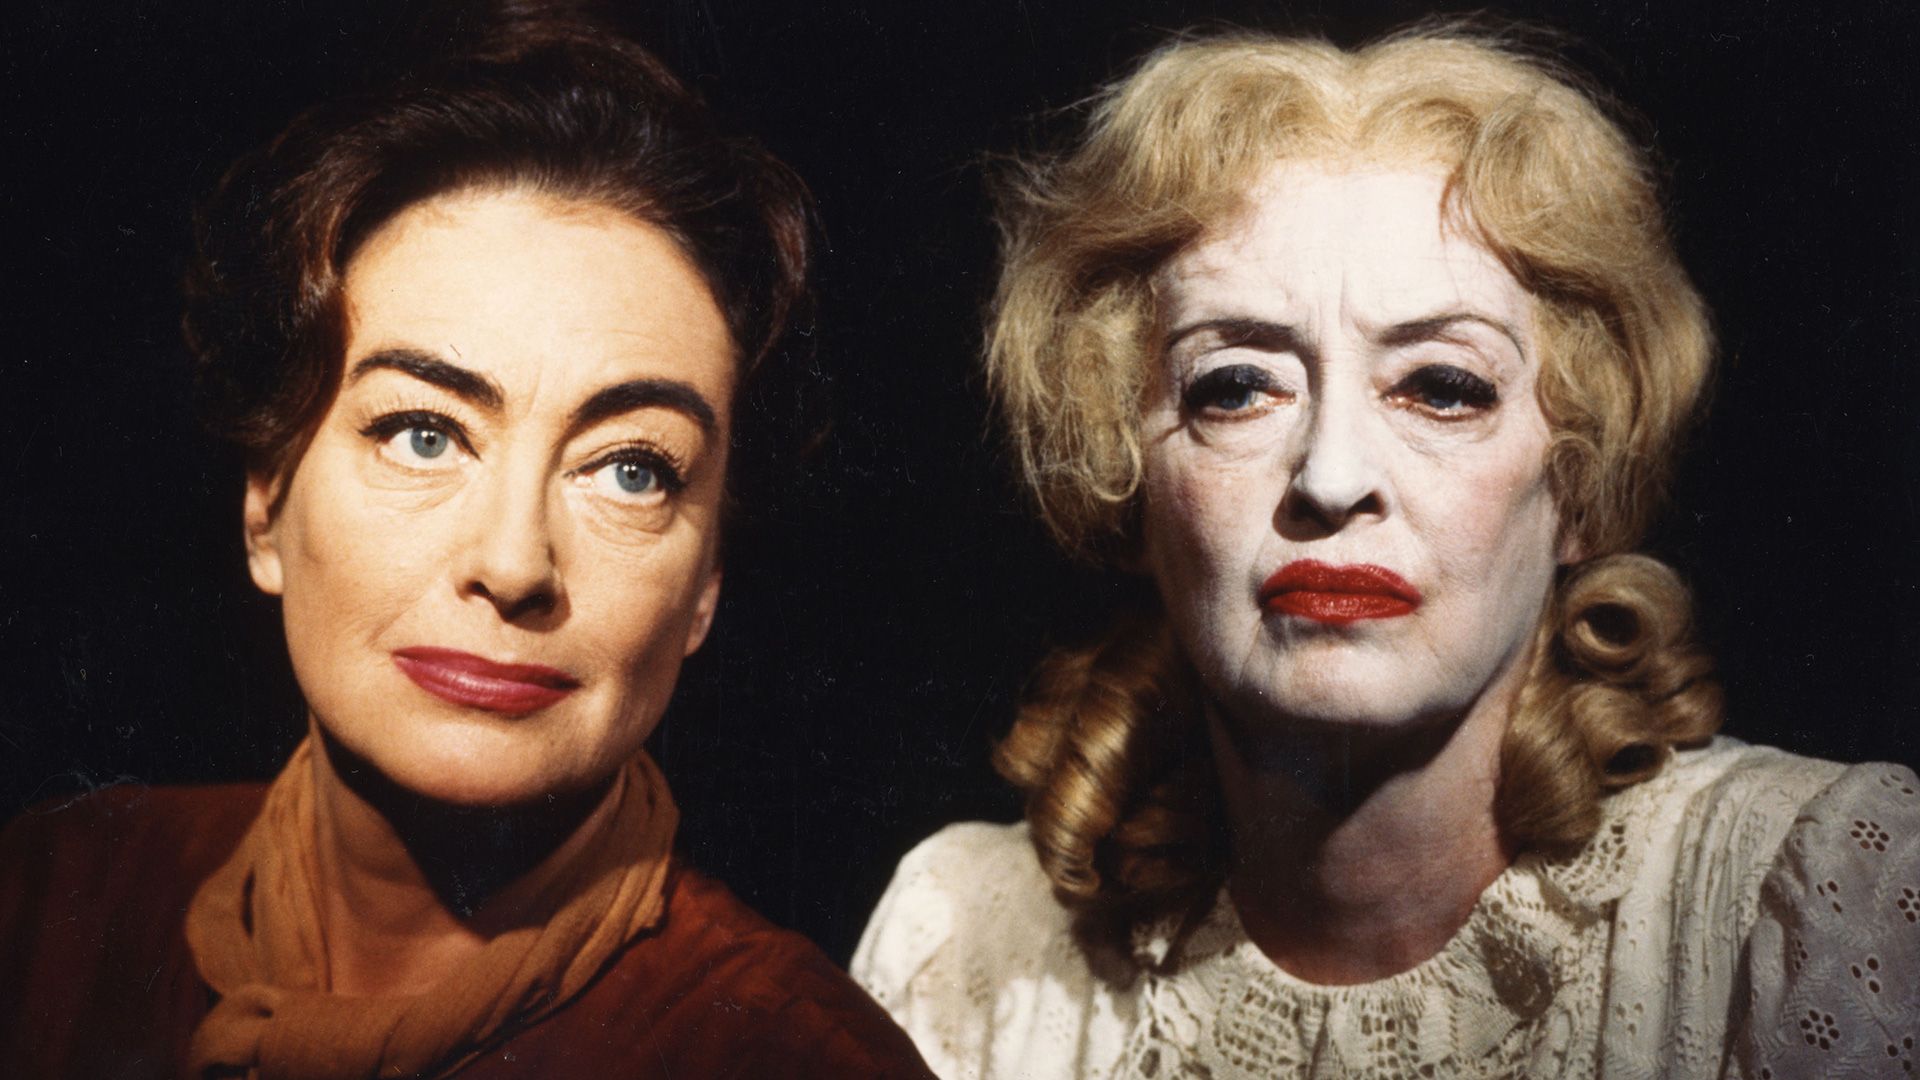 October 1962: “Whatever Happened to Baby Jane?” Starring Bette Davis and Joan Crawford Was Released